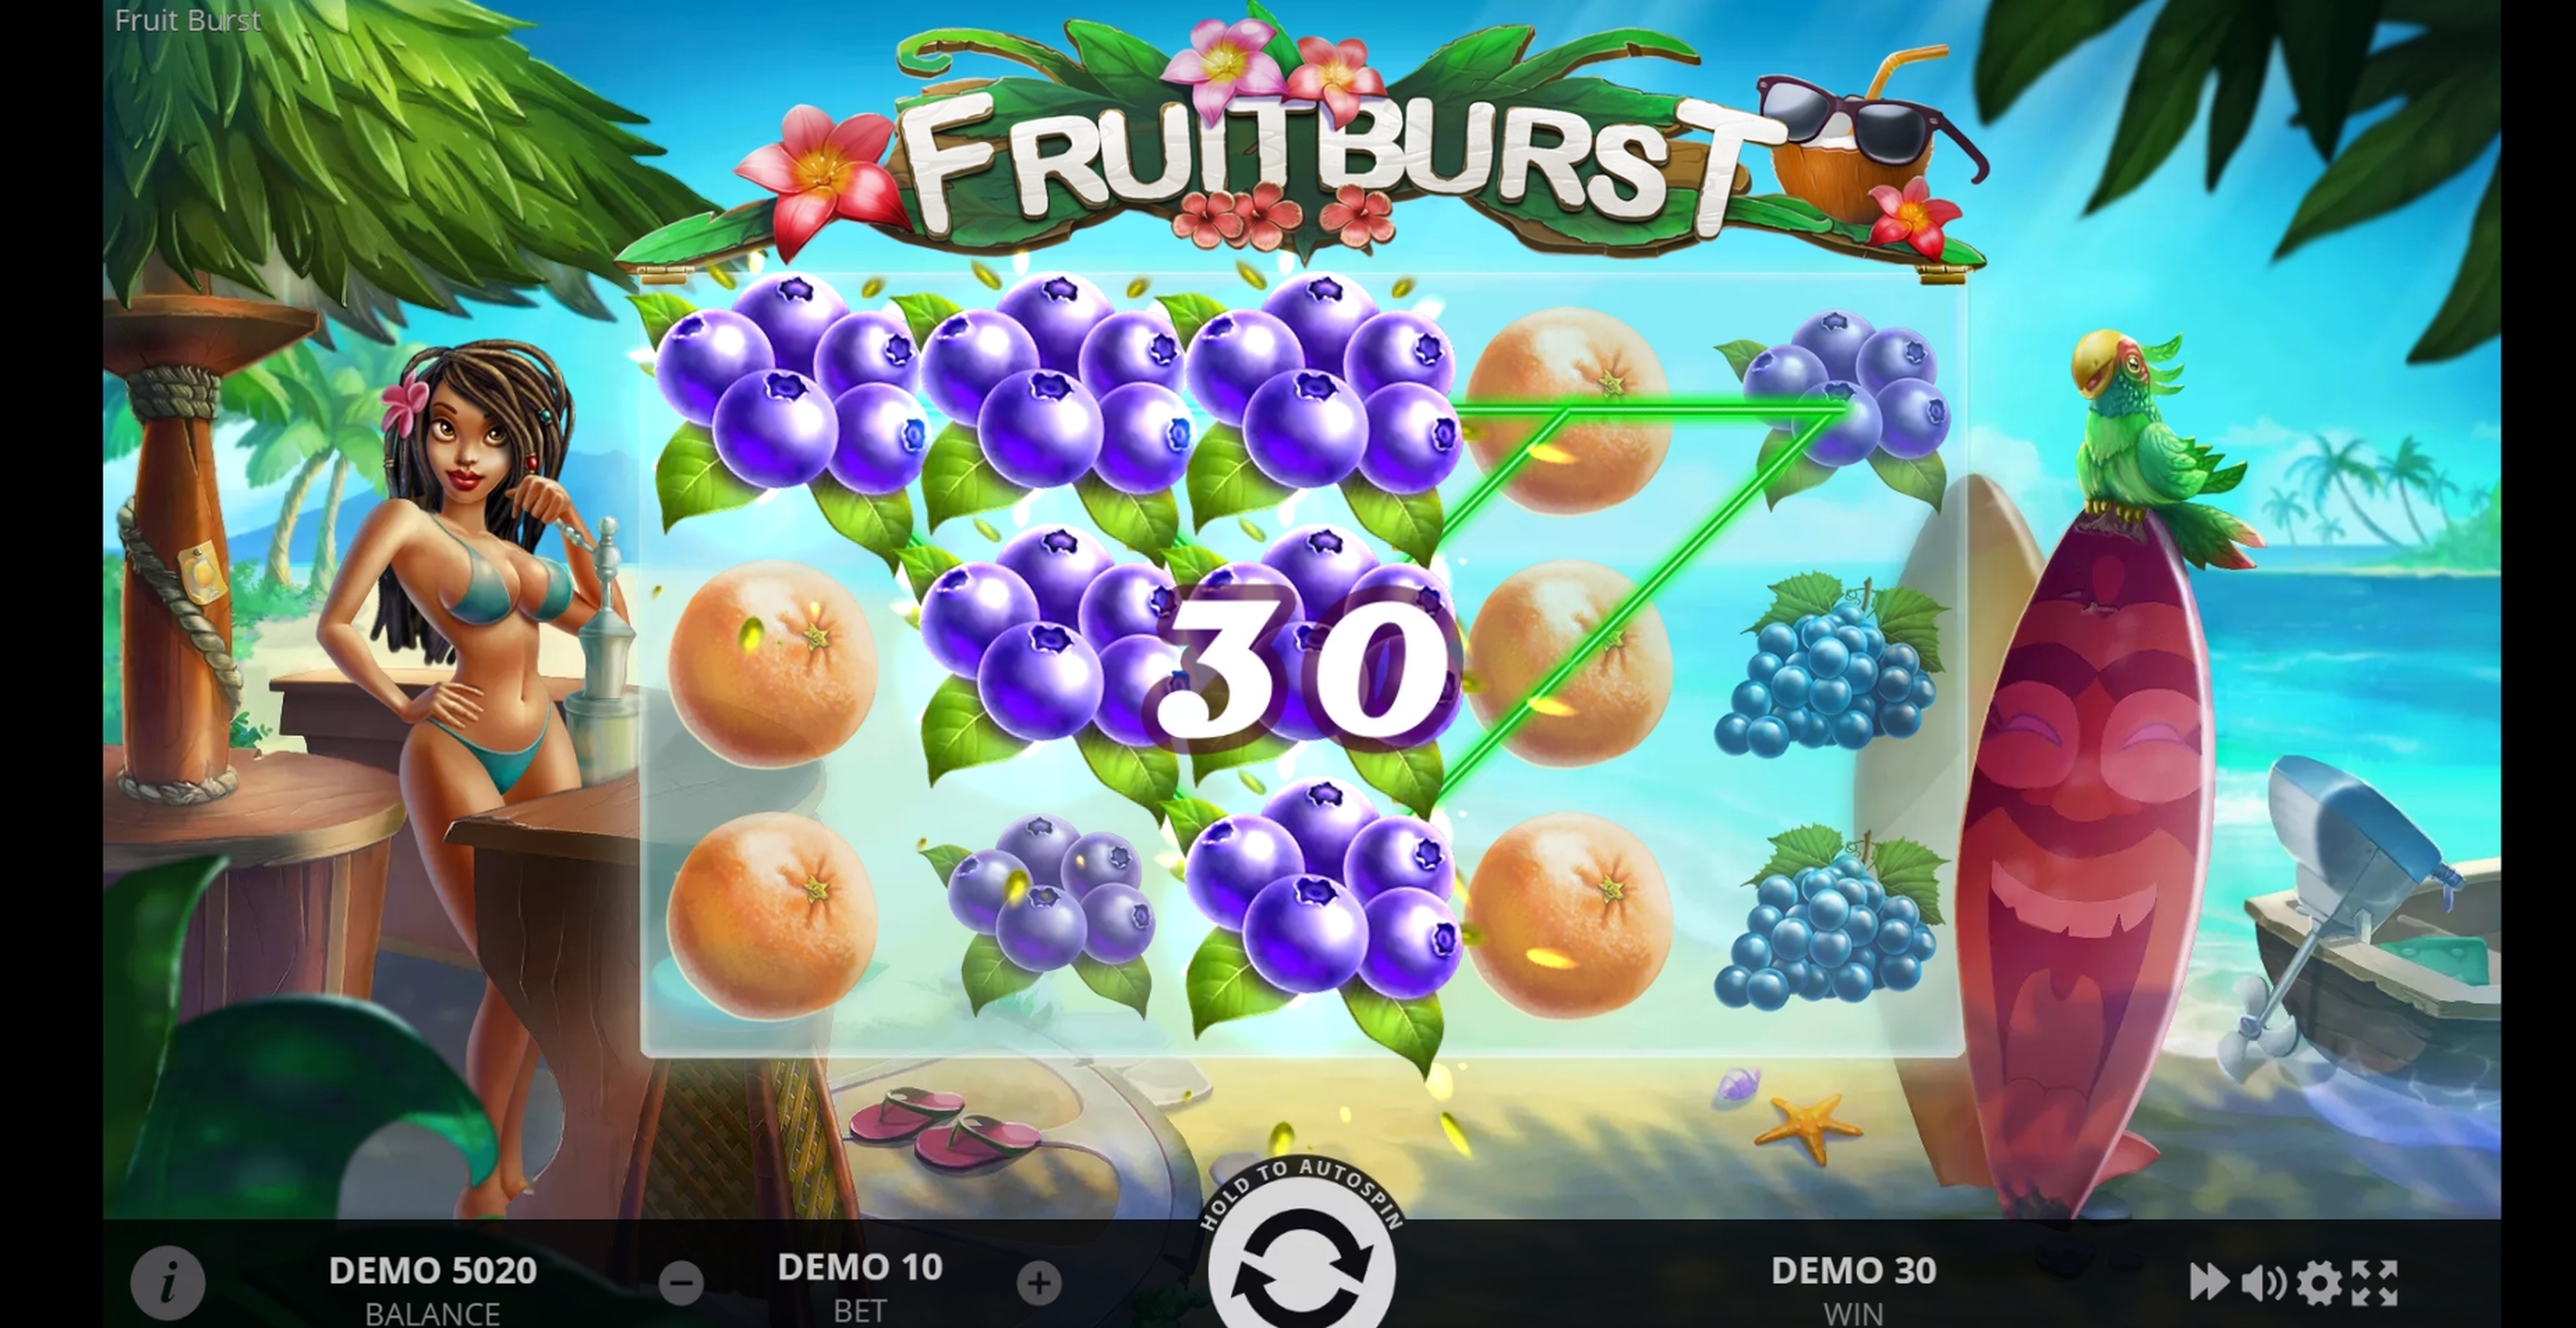 Win Money in Fruitburst Free Slot Game by Evoplay Entertainment